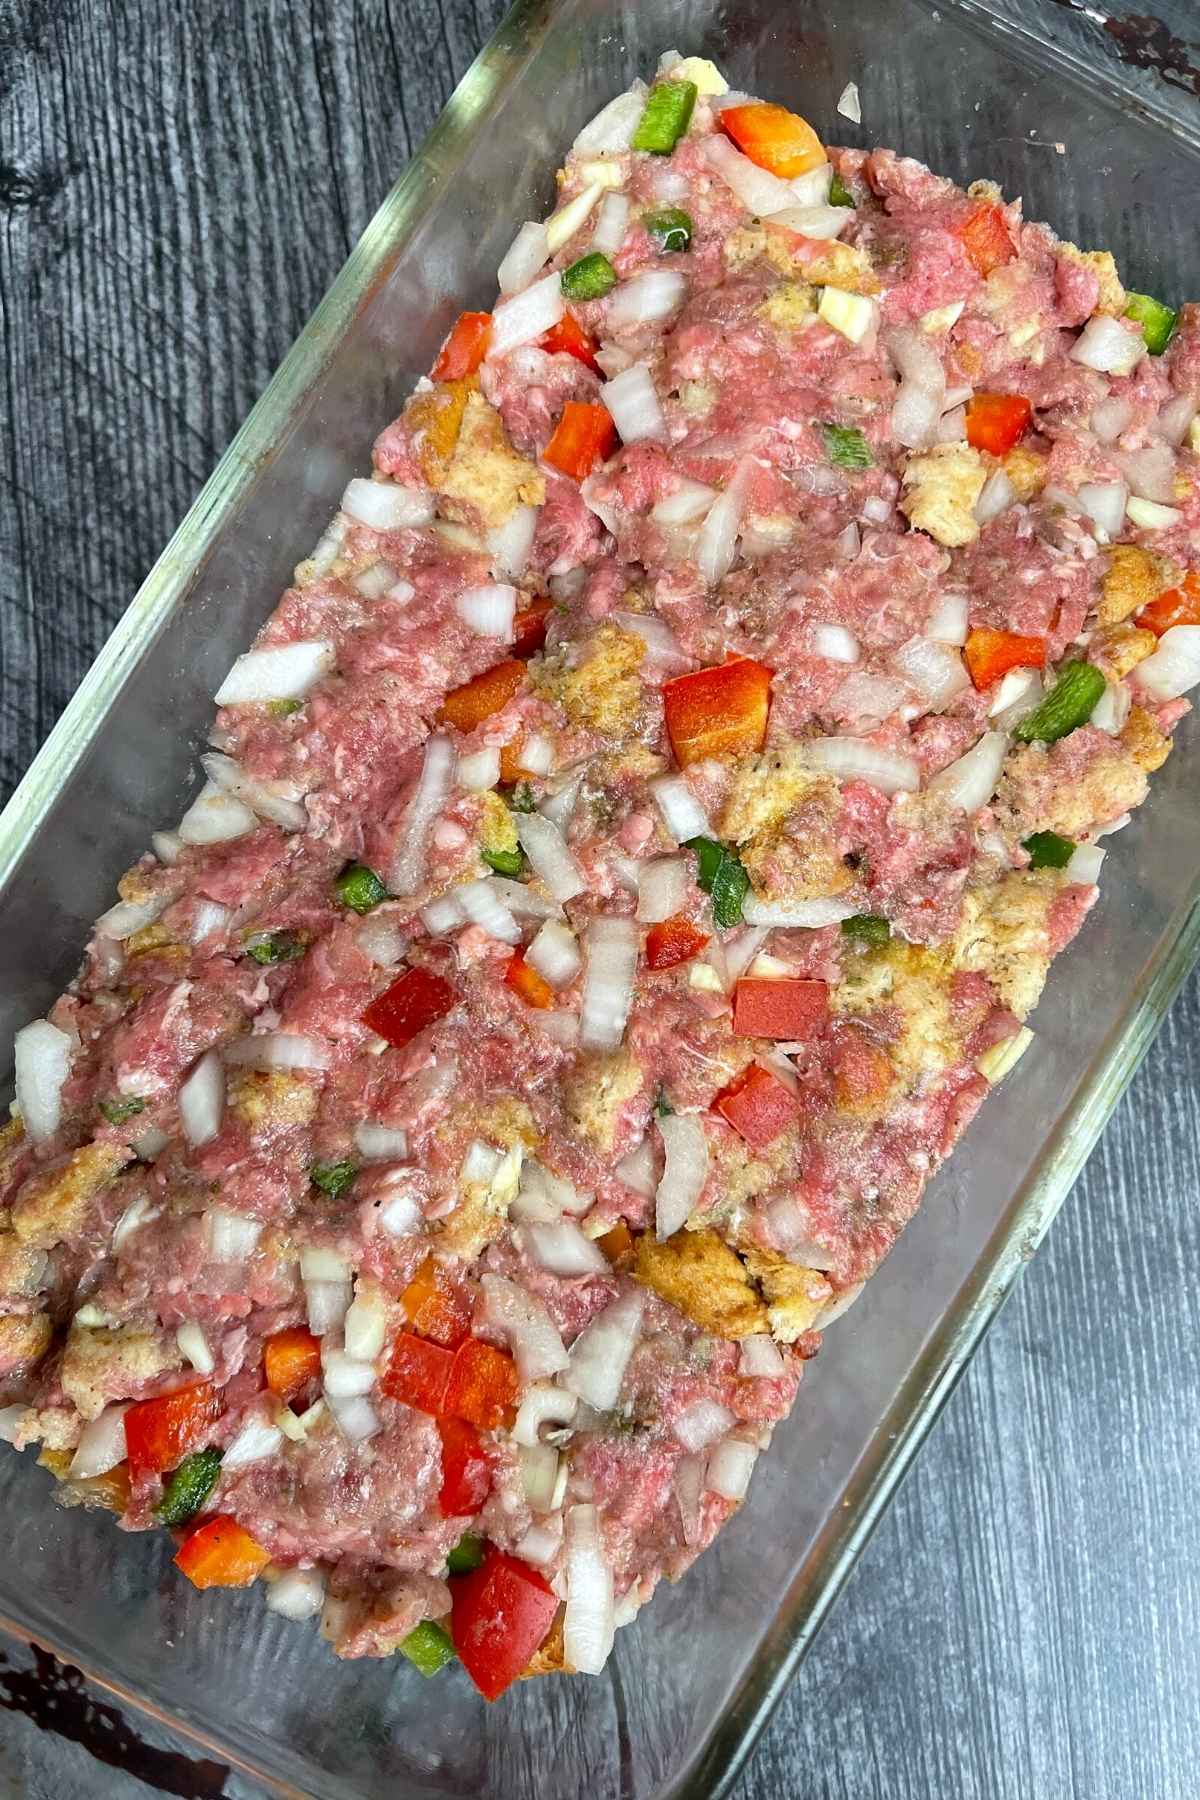 Raw meatloaf in a baking dish with specks of bread crumbs, peppers, and onions visible.